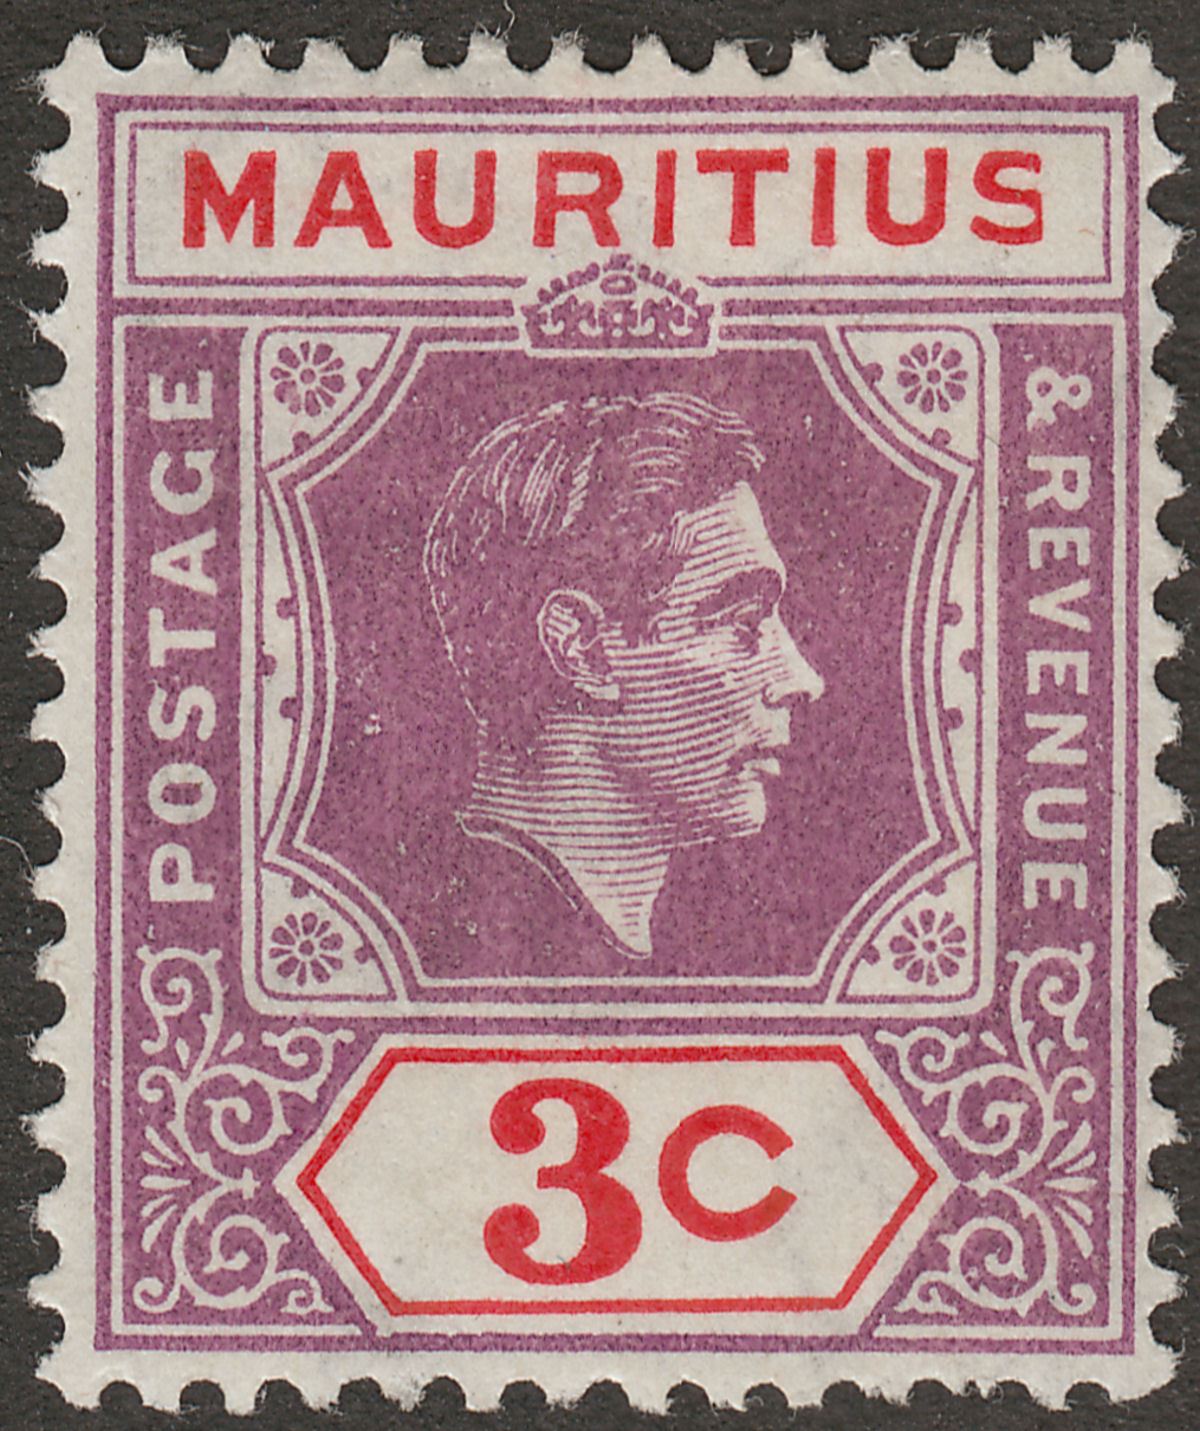 Mauritius 1938 KGVI 3c Purple + Scarlet w Sliced S Variety Mint SG253a cat £85